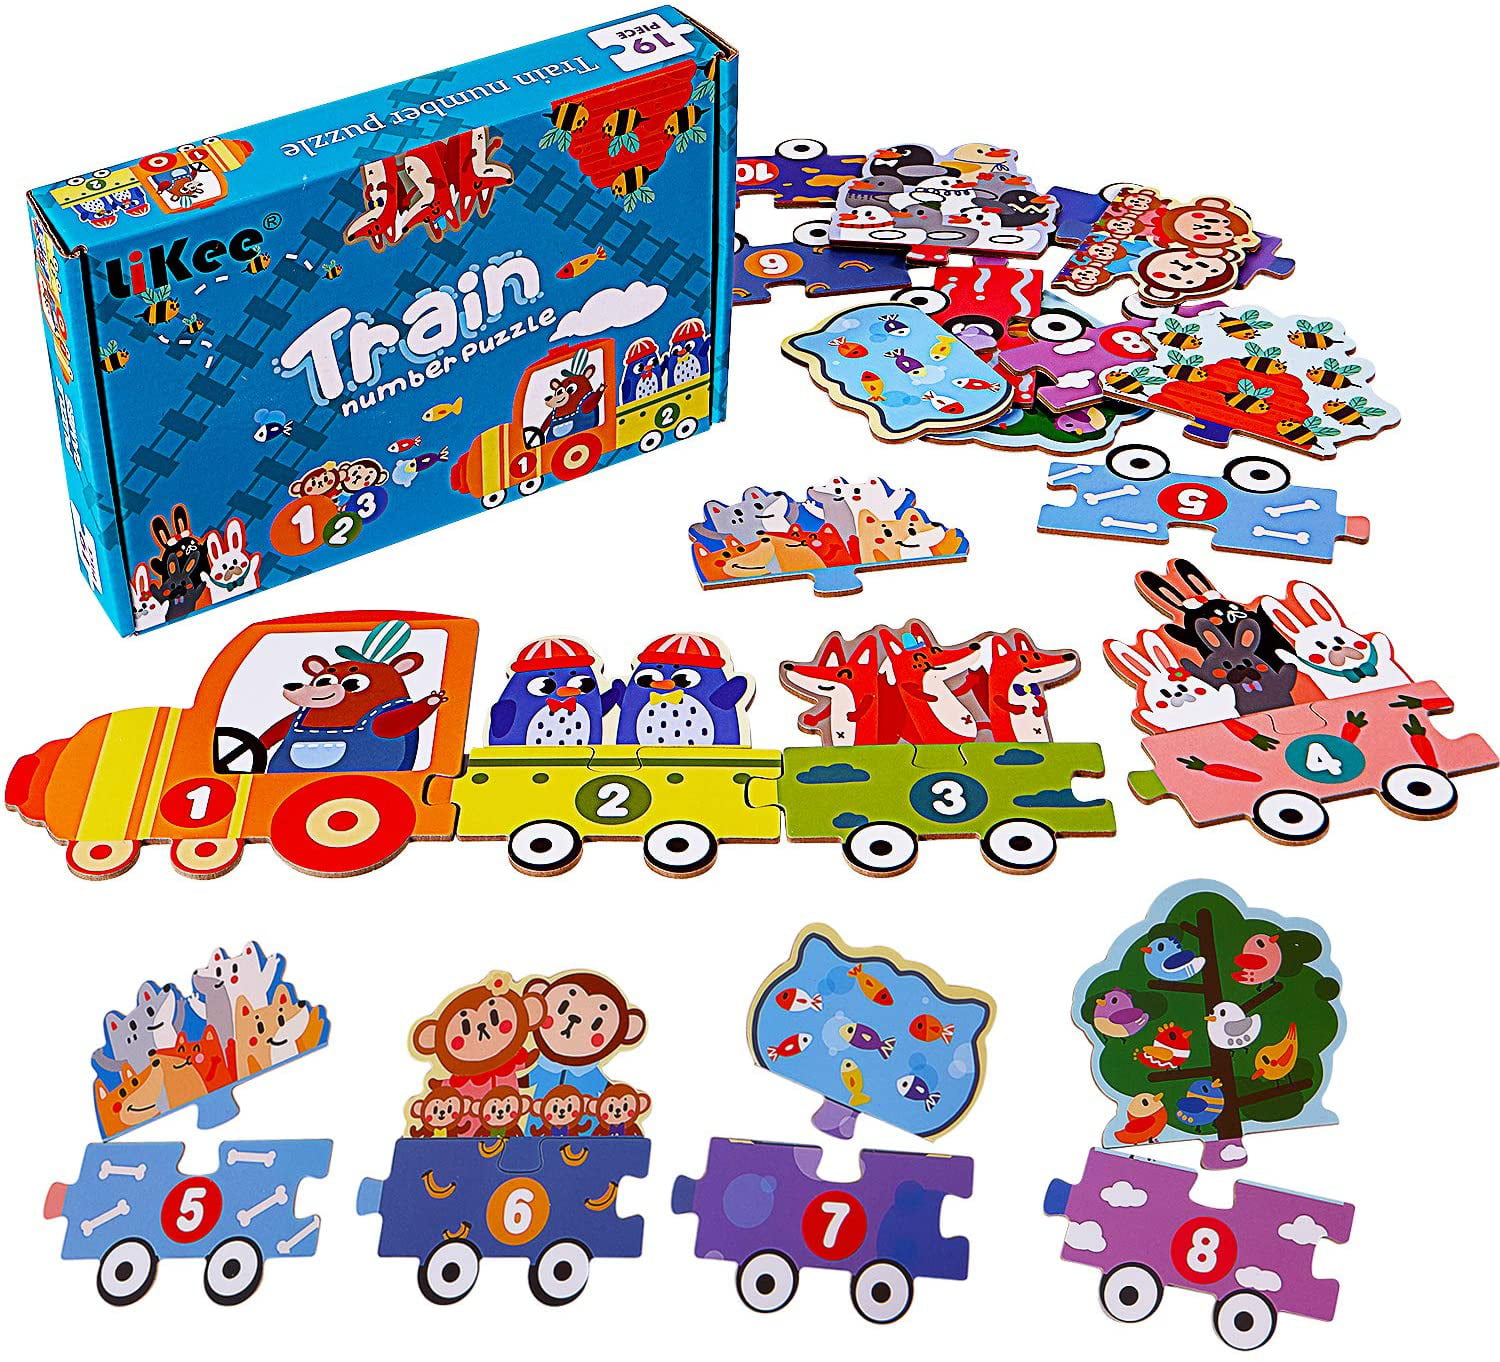 Kids Childrens Jigsaw Puzzles Educational Toys Puzzles Mathematics Learning